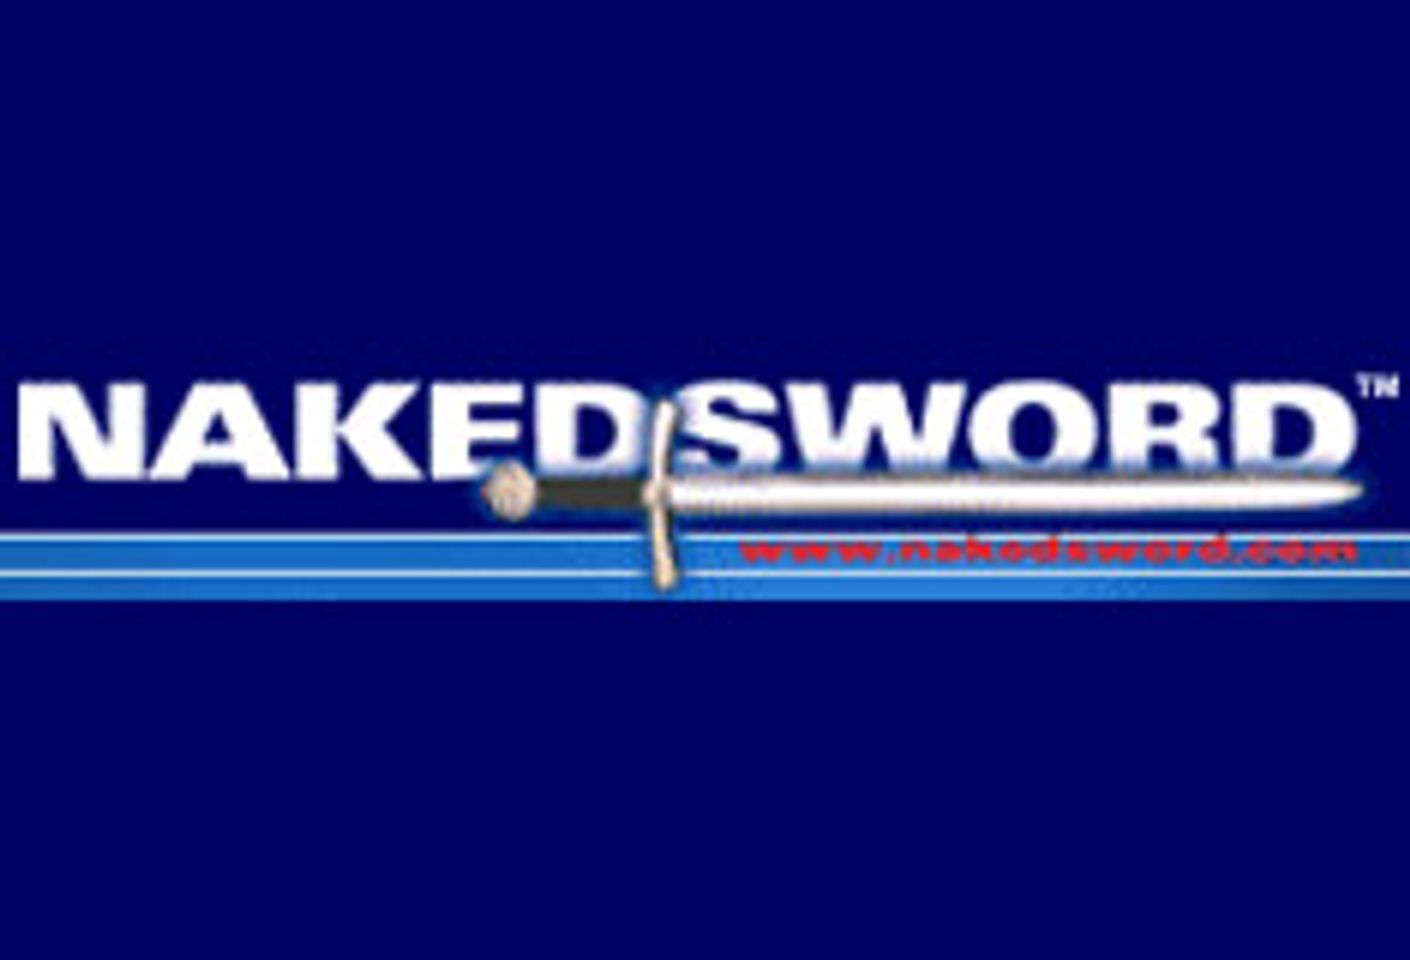 NakedSword Prepares For Summer With Slate Of High-Profile Online Debuts